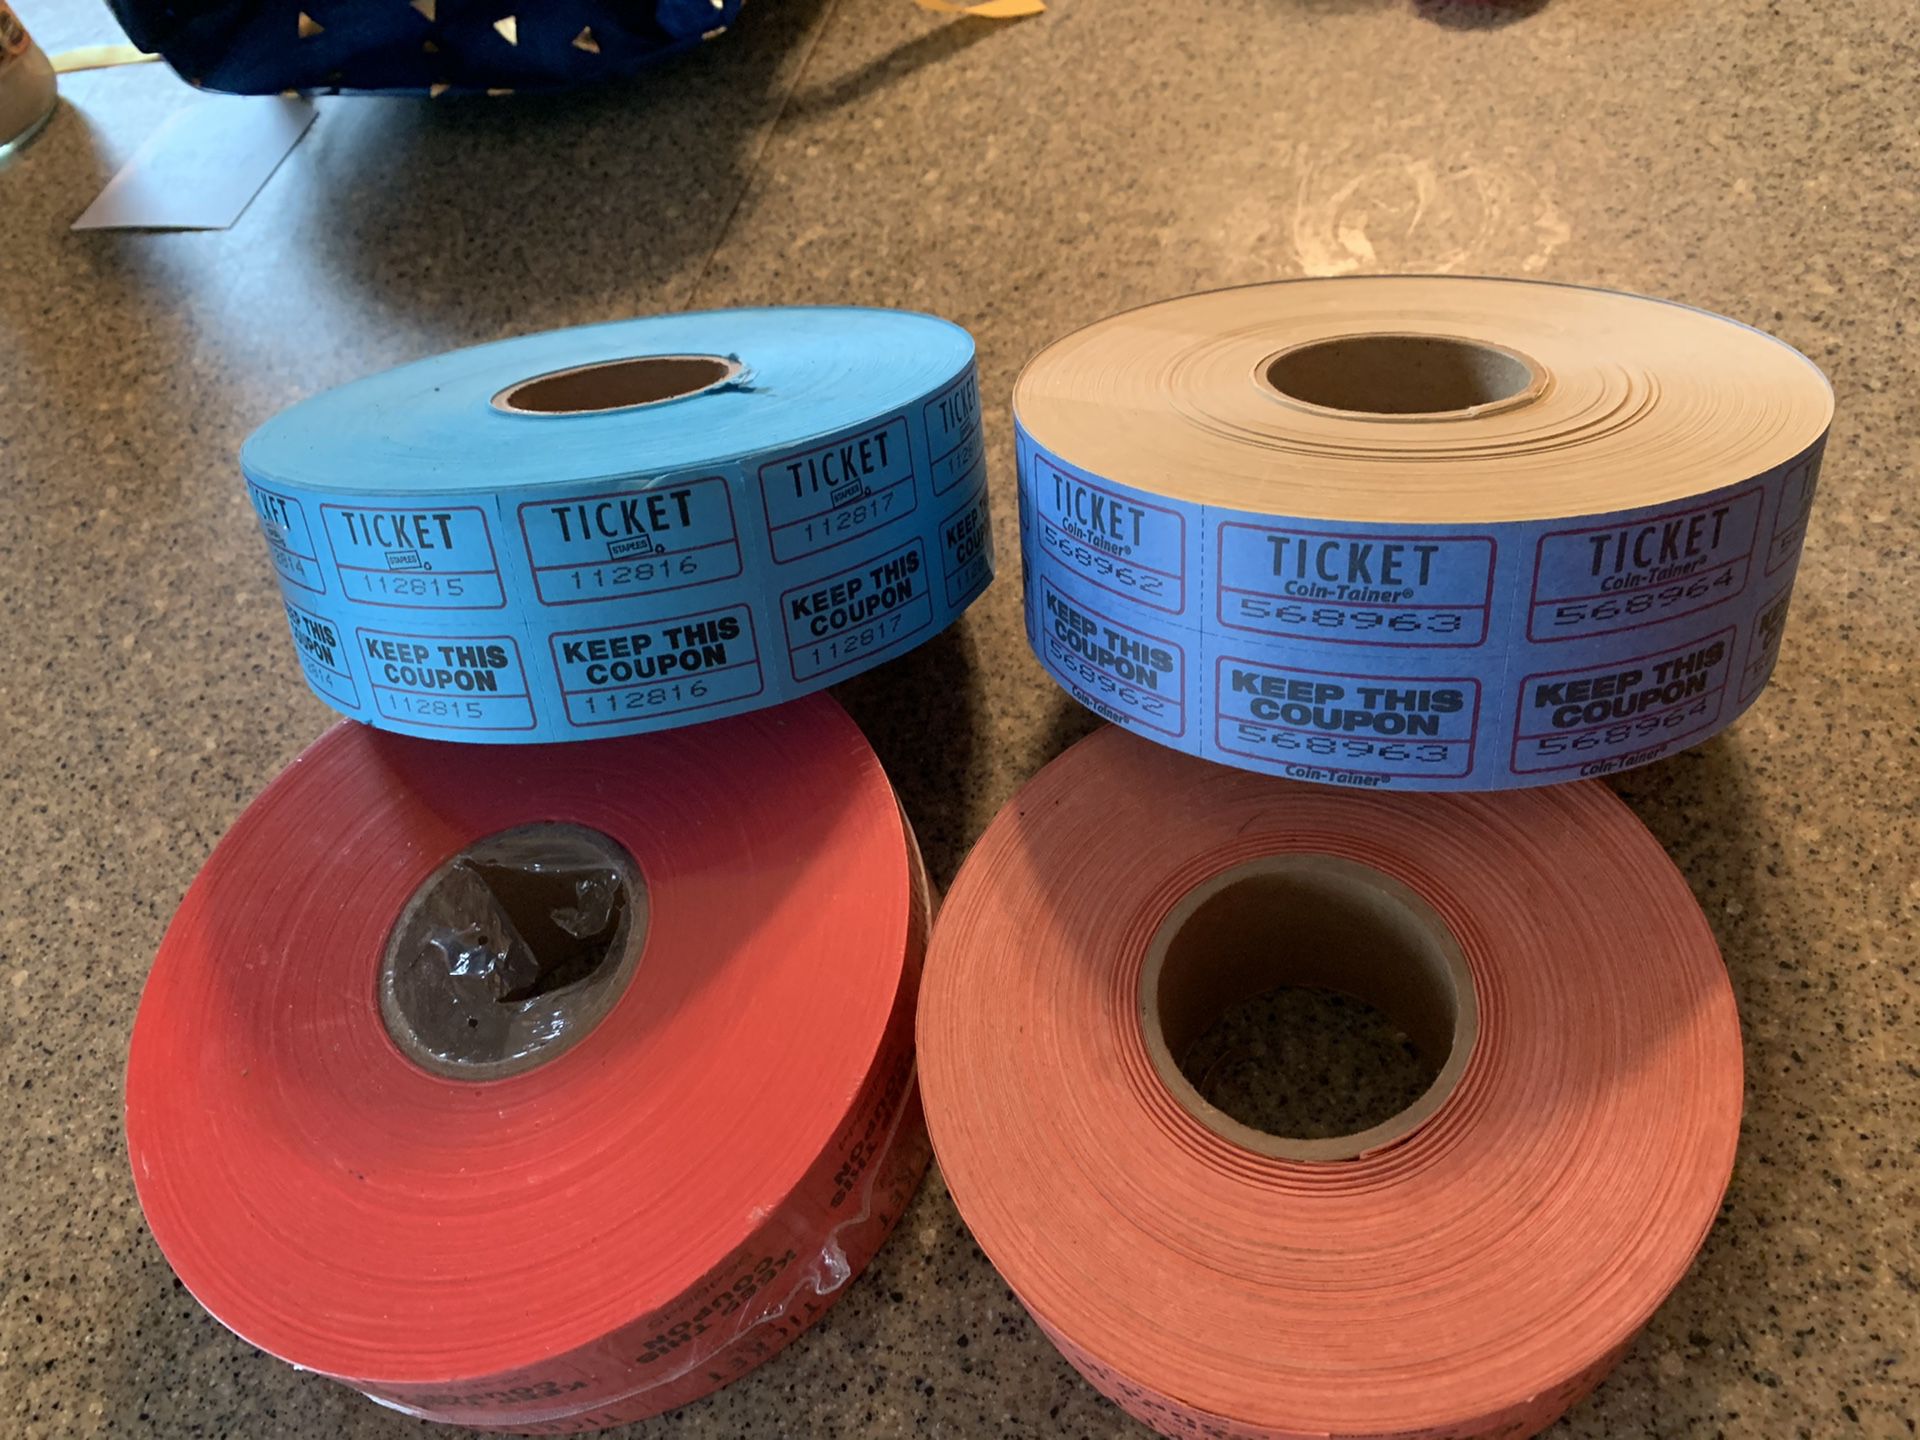 4 rolls of double ticket raffle tickets. Great condition. $10 for all 3.